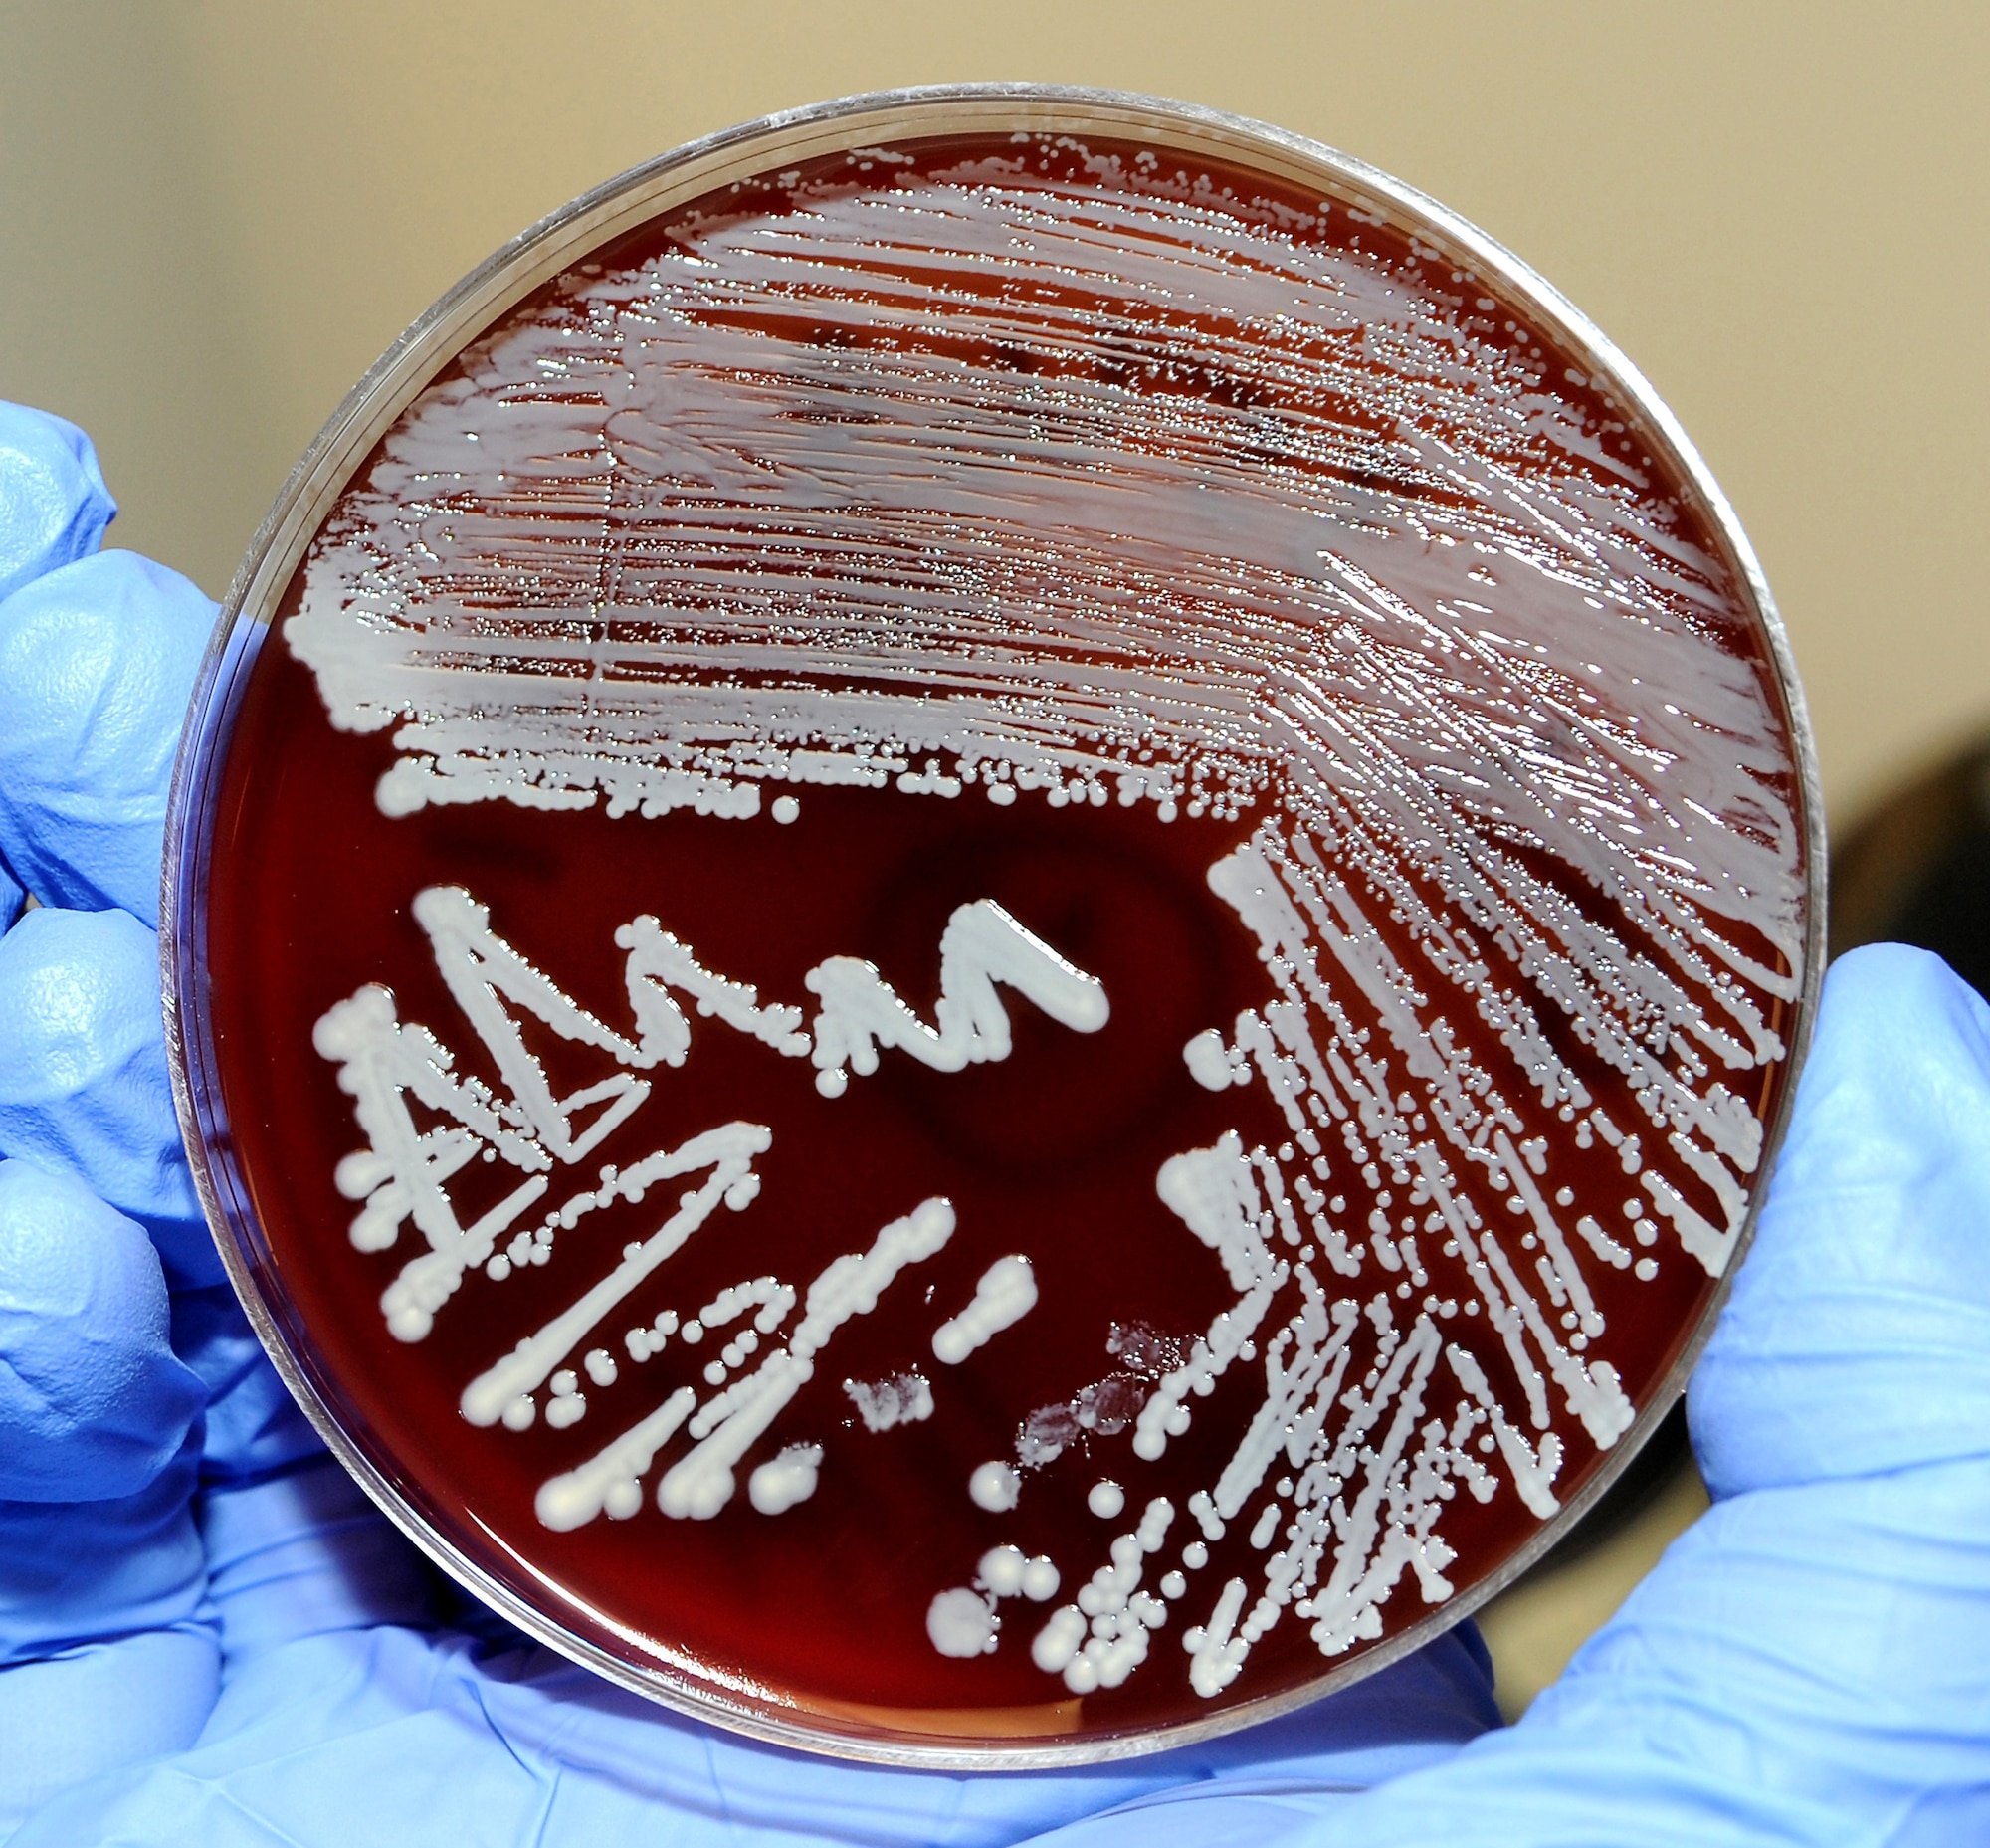 Staph bacteria growing on a culture plate. (U.S. Air Force photo/ Staff Sgt. Liliana Moreno)